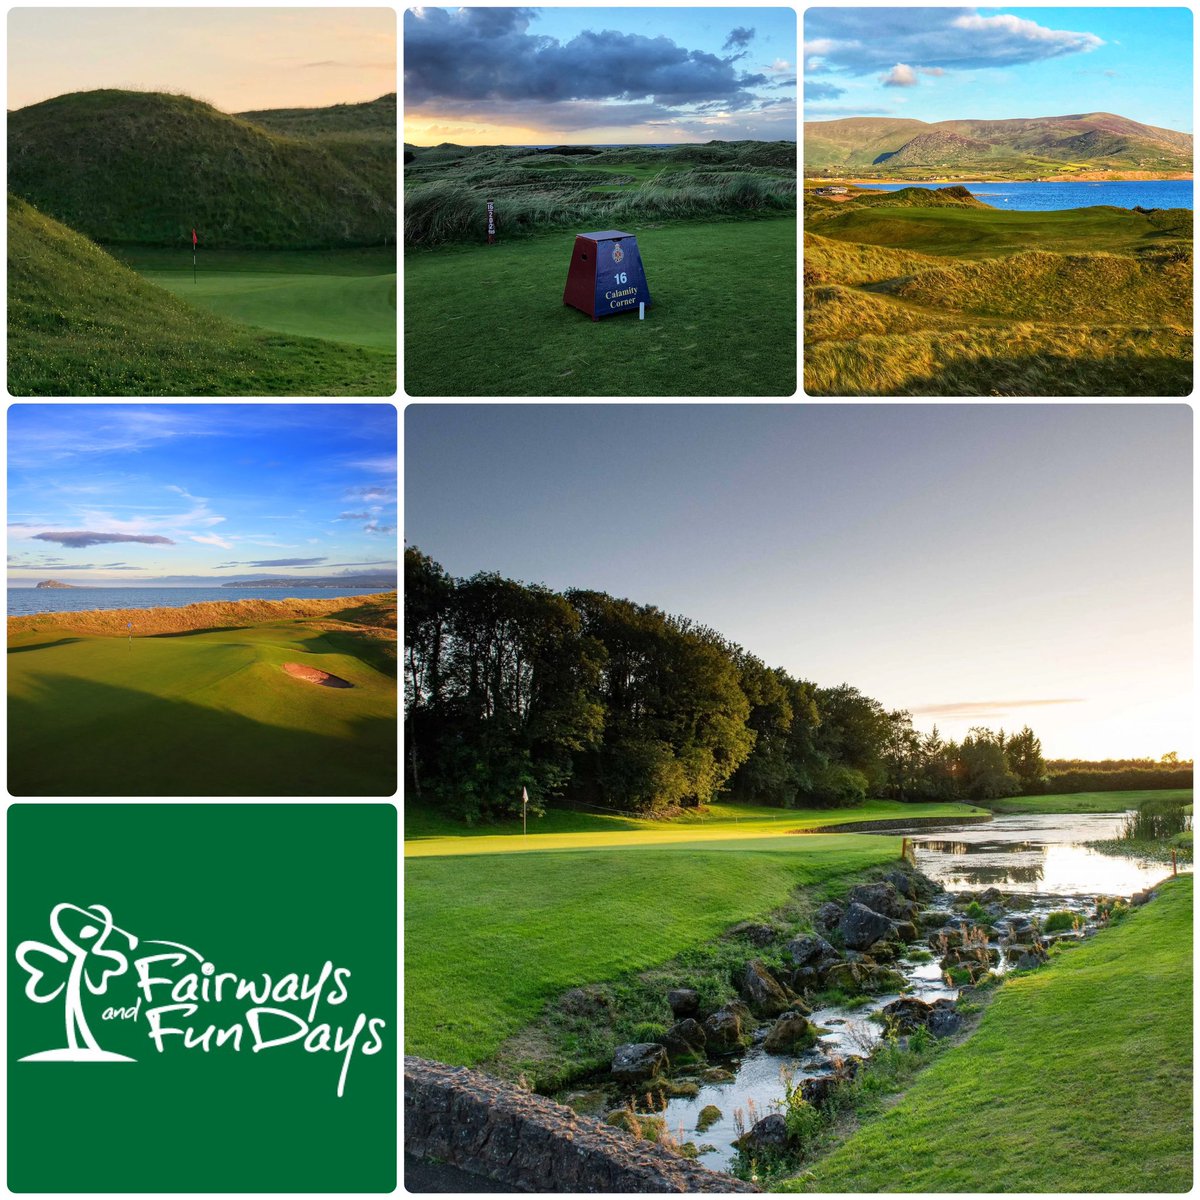 We all love a love a good Par 3, short or long we all have our favourites! Tell us about yours? Here’s just a few of our most loved short holes: The 3rd @GolfMountJuliet ⛳️ The 16th @royalportrush ⛳️ The 5th @LahinchGolfClub ⛳️ The 15th @PGC1894 ⛳️ The 17th @watervillelinks